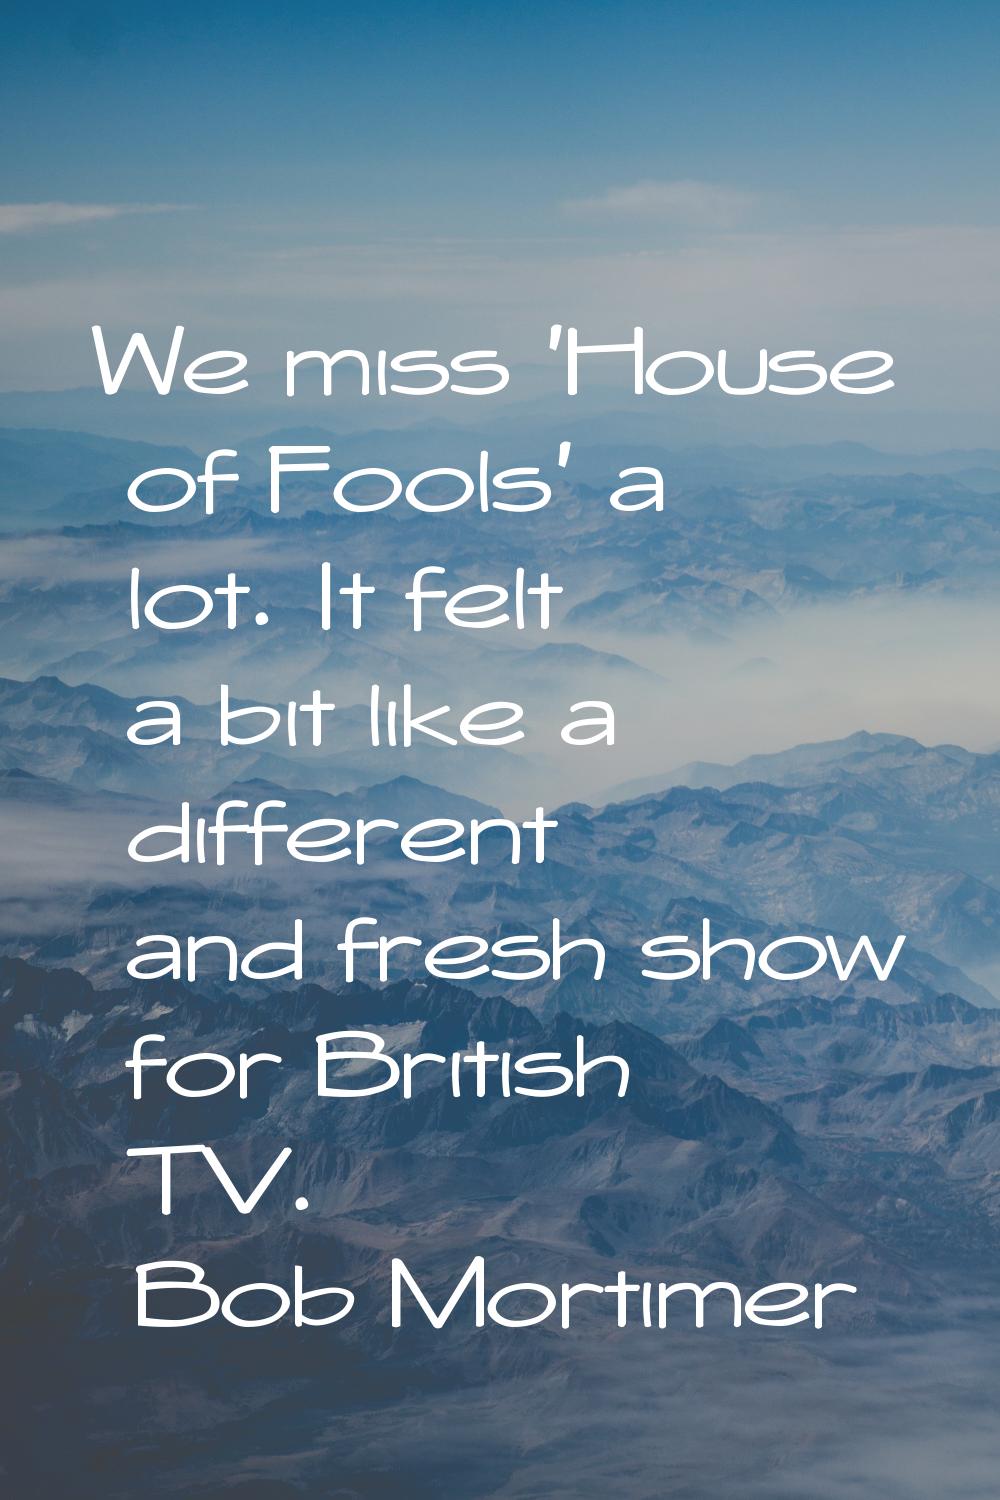 We miss 'House of Fools' a lot. It felt a bit like a different and fresh show for British TV.